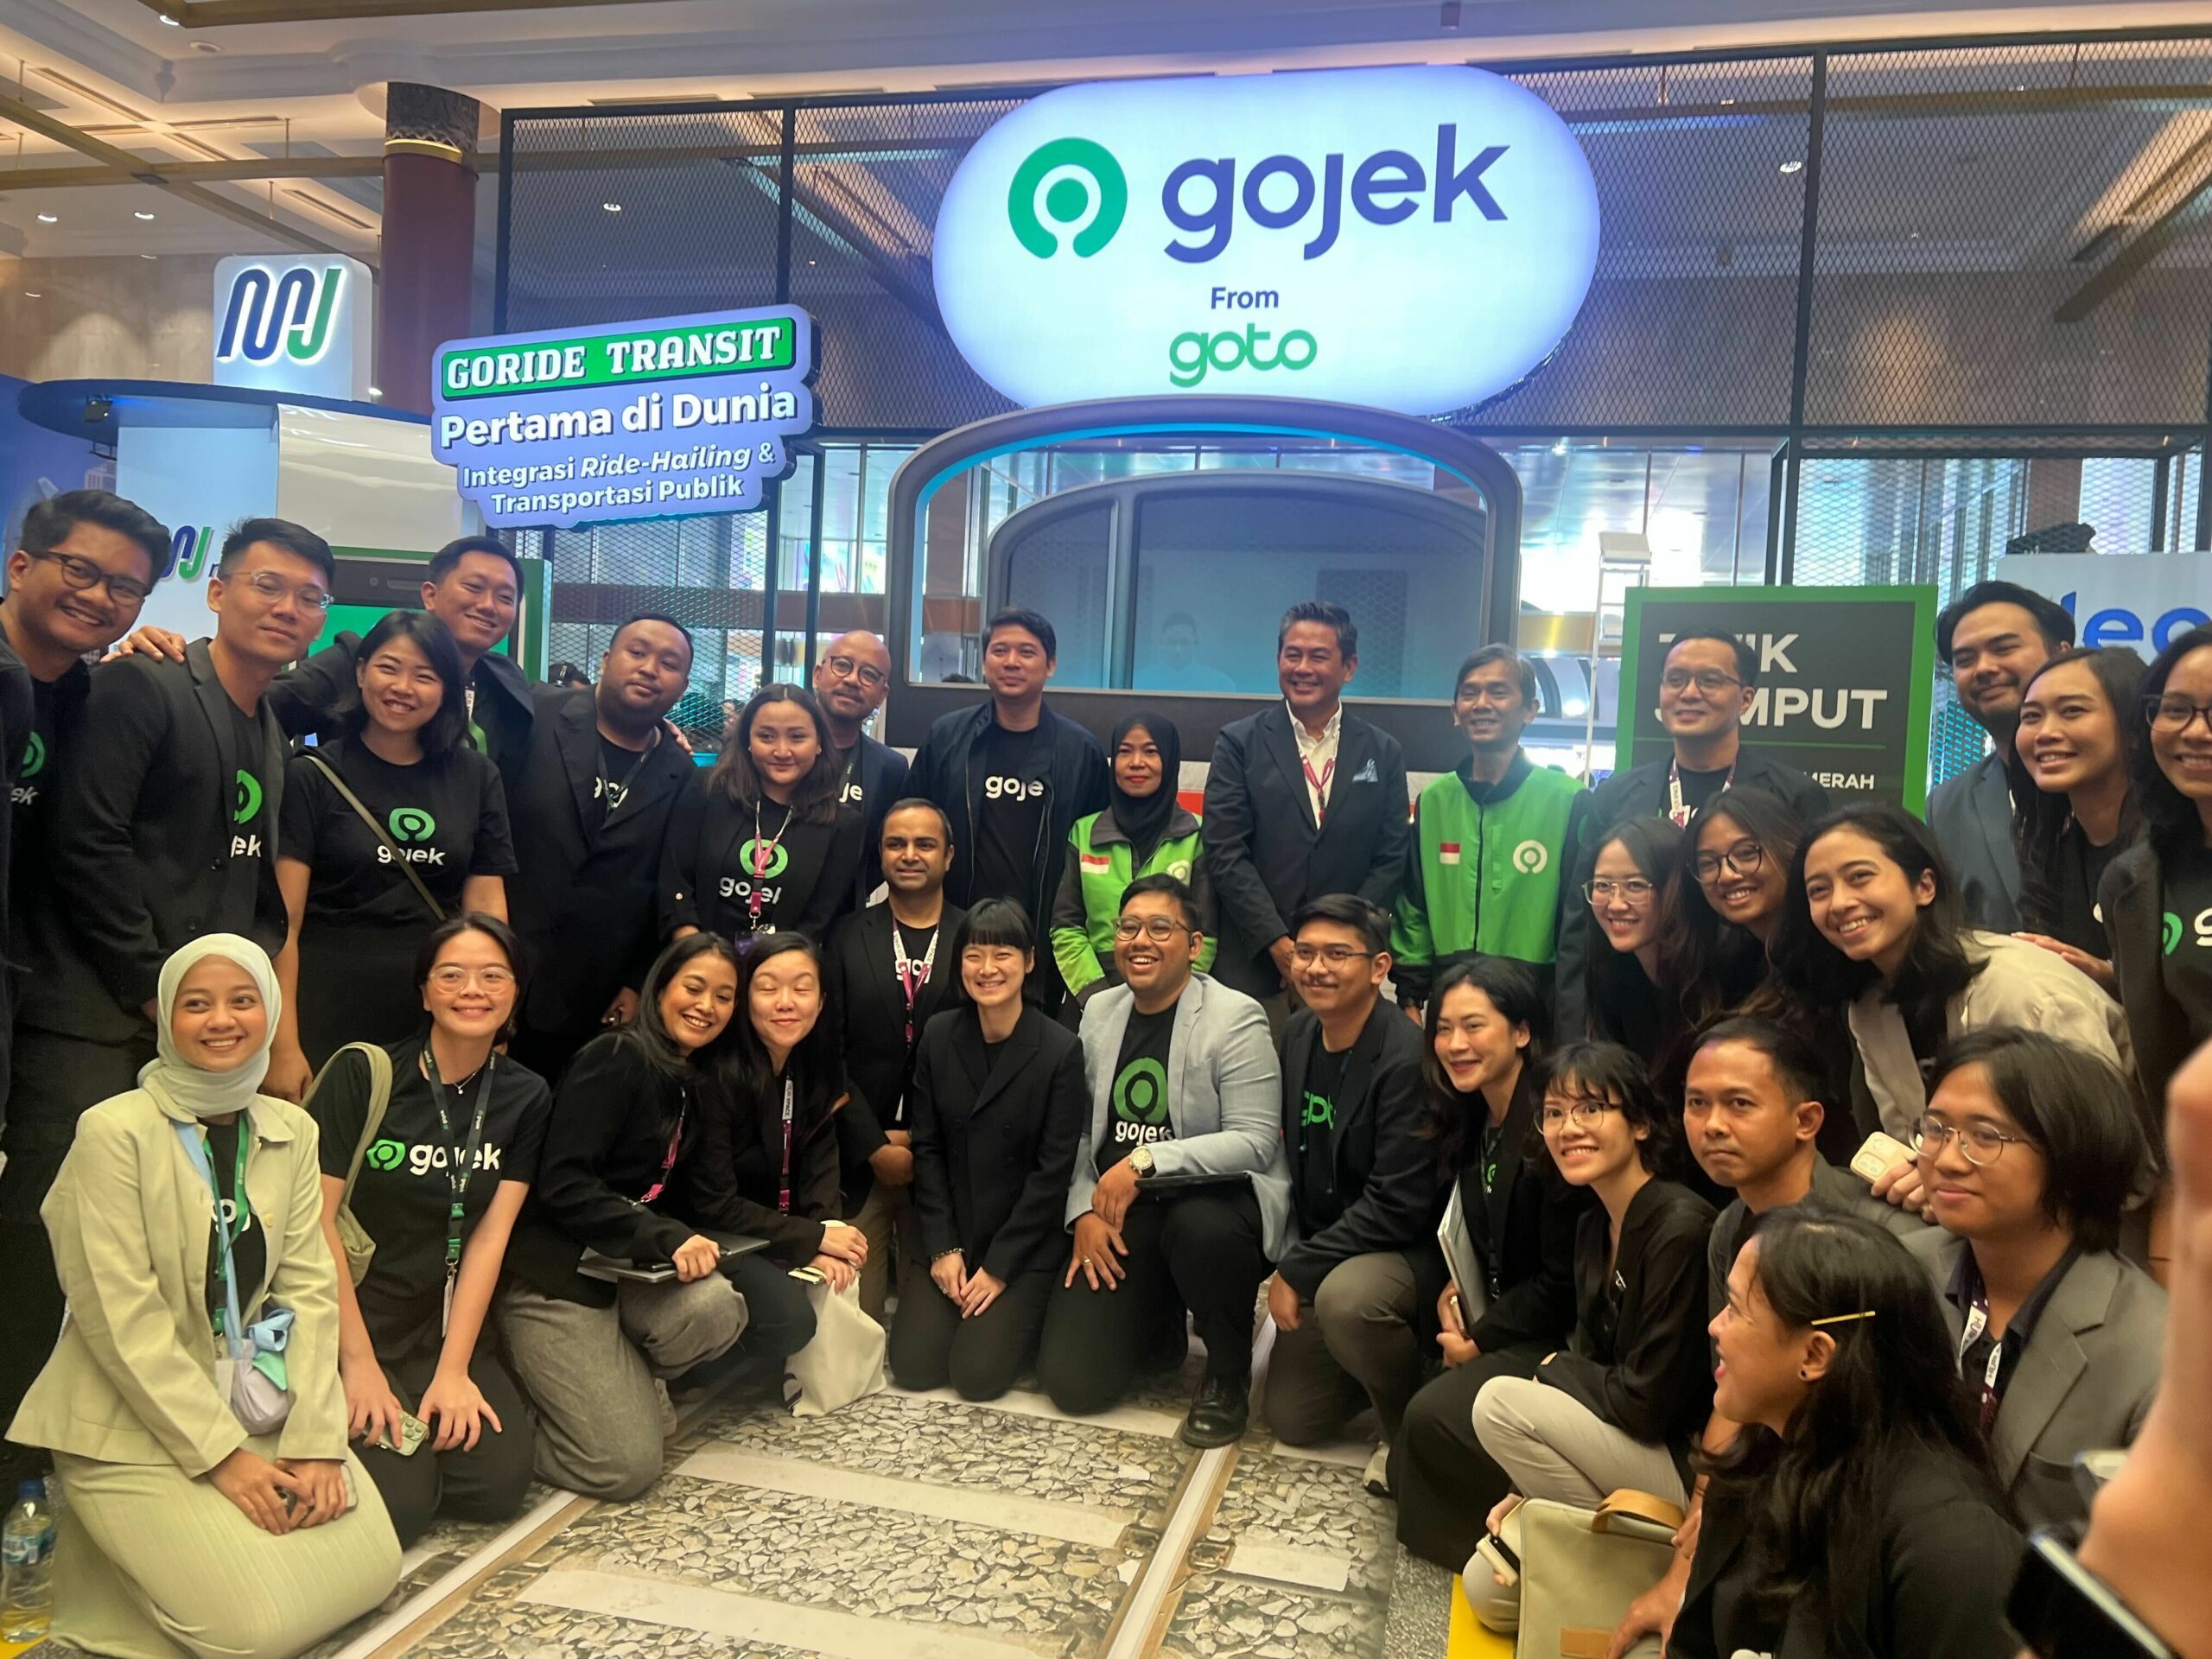 Gojek seeks to grow customer base with launch of GoRide Transit for multimodal travel